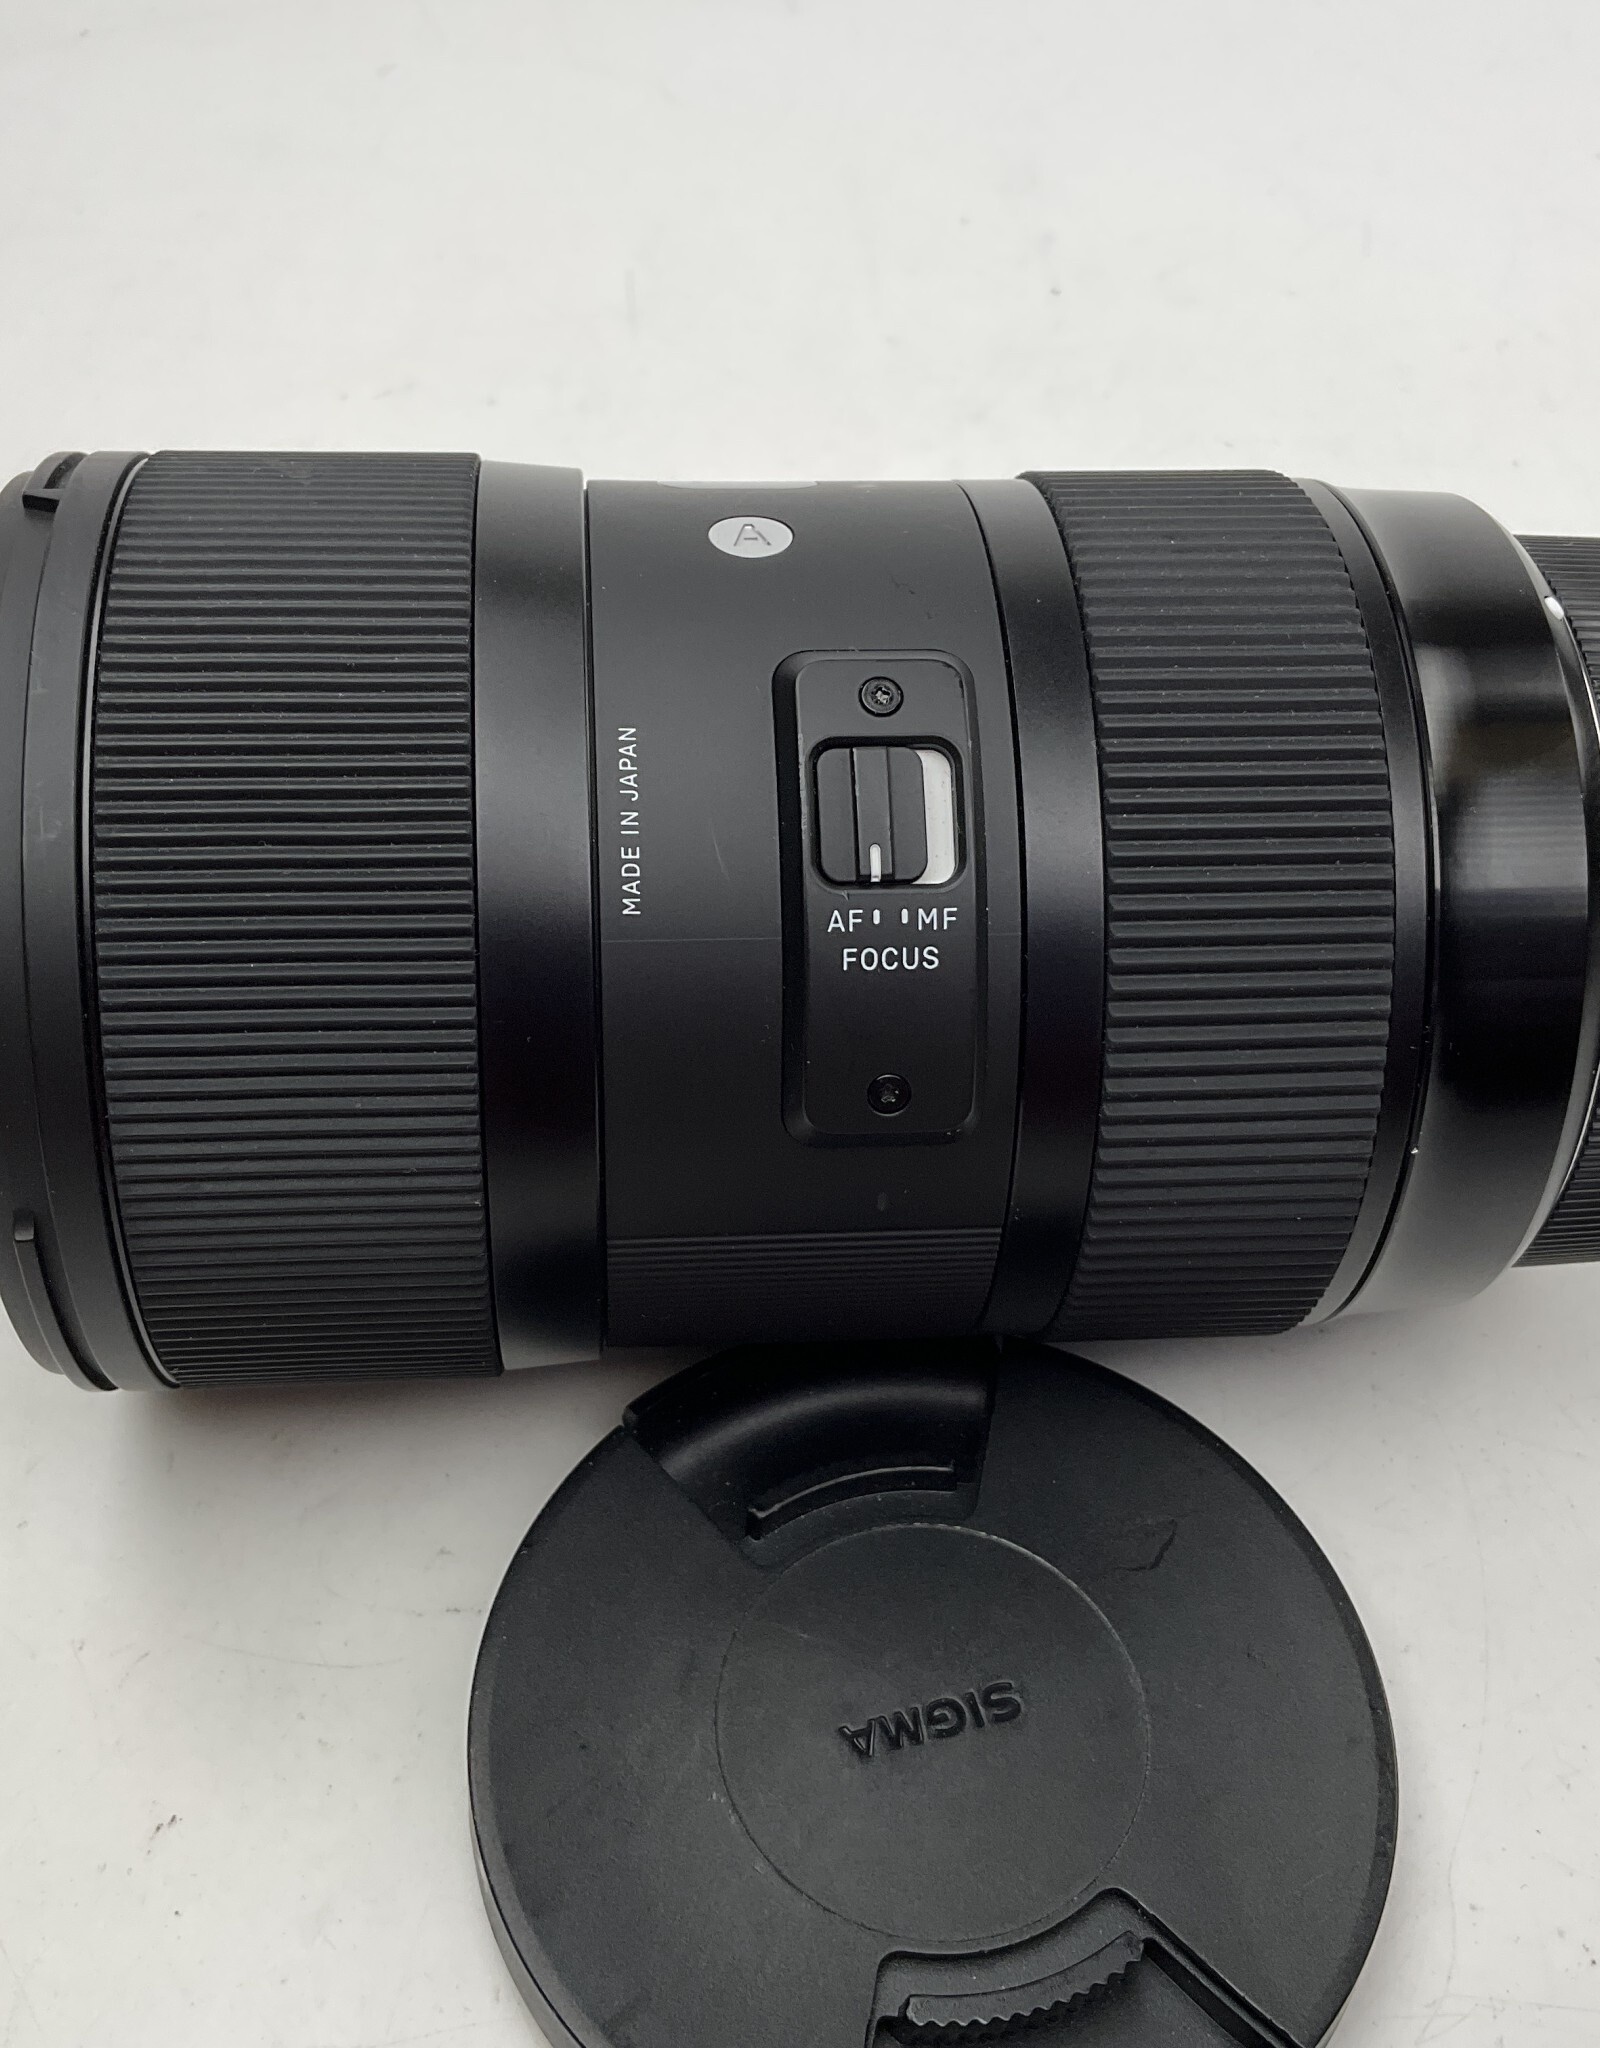 SIGMA Sigma Art 18-35mm f1.8 DC Lens No Hood for Canon Used Good